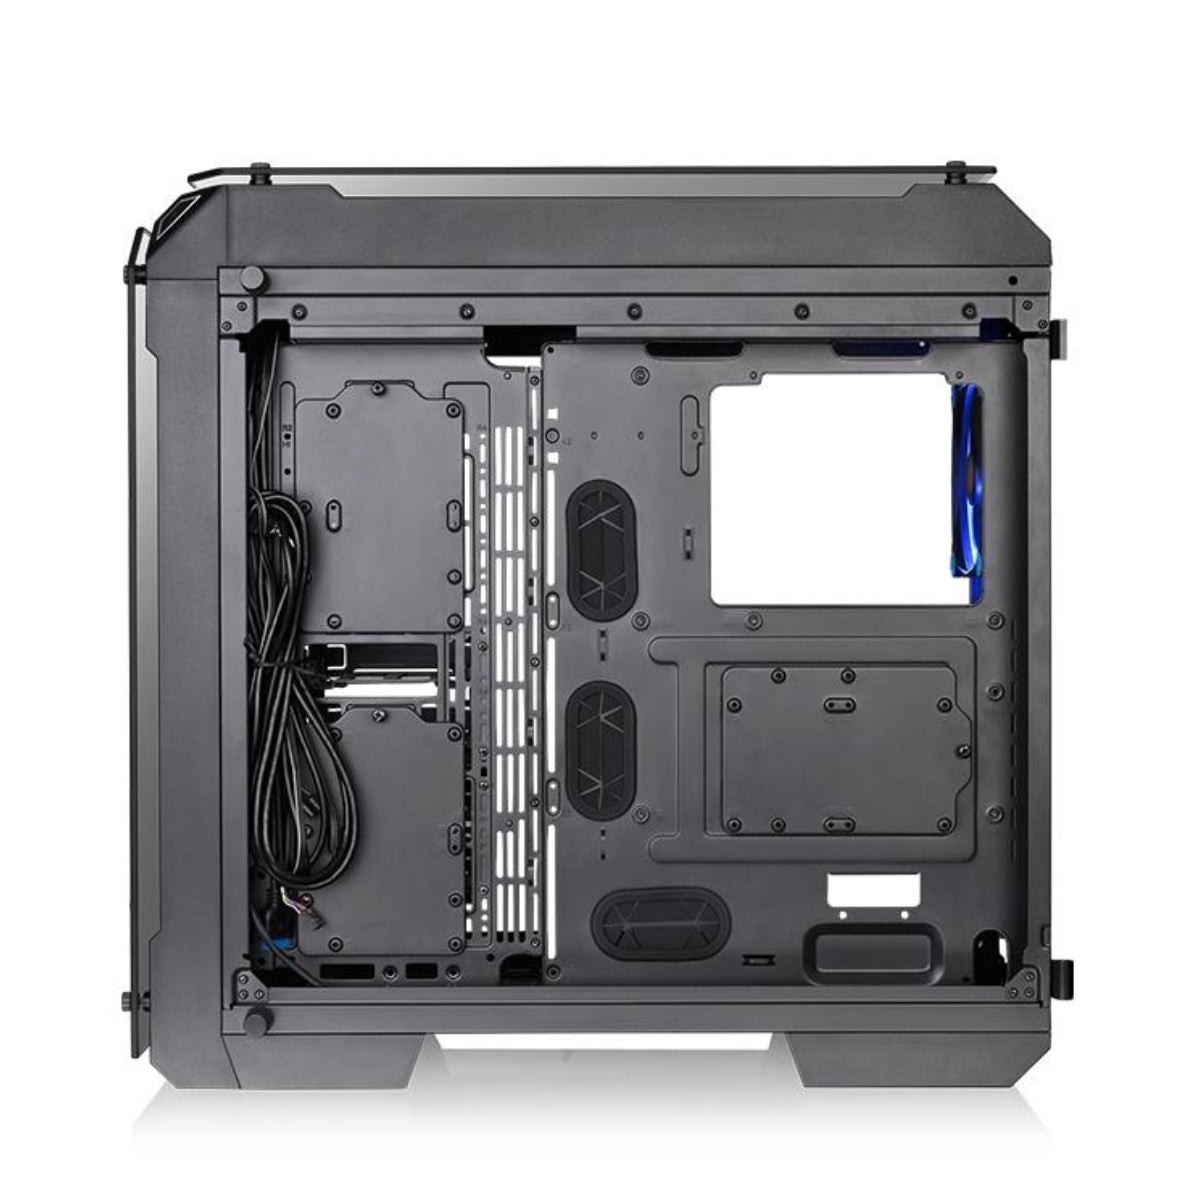 Thermaltake View 71 TG RGB Edition E-ATX Full Tower Case - Store 974 | ستور ٩٧٤